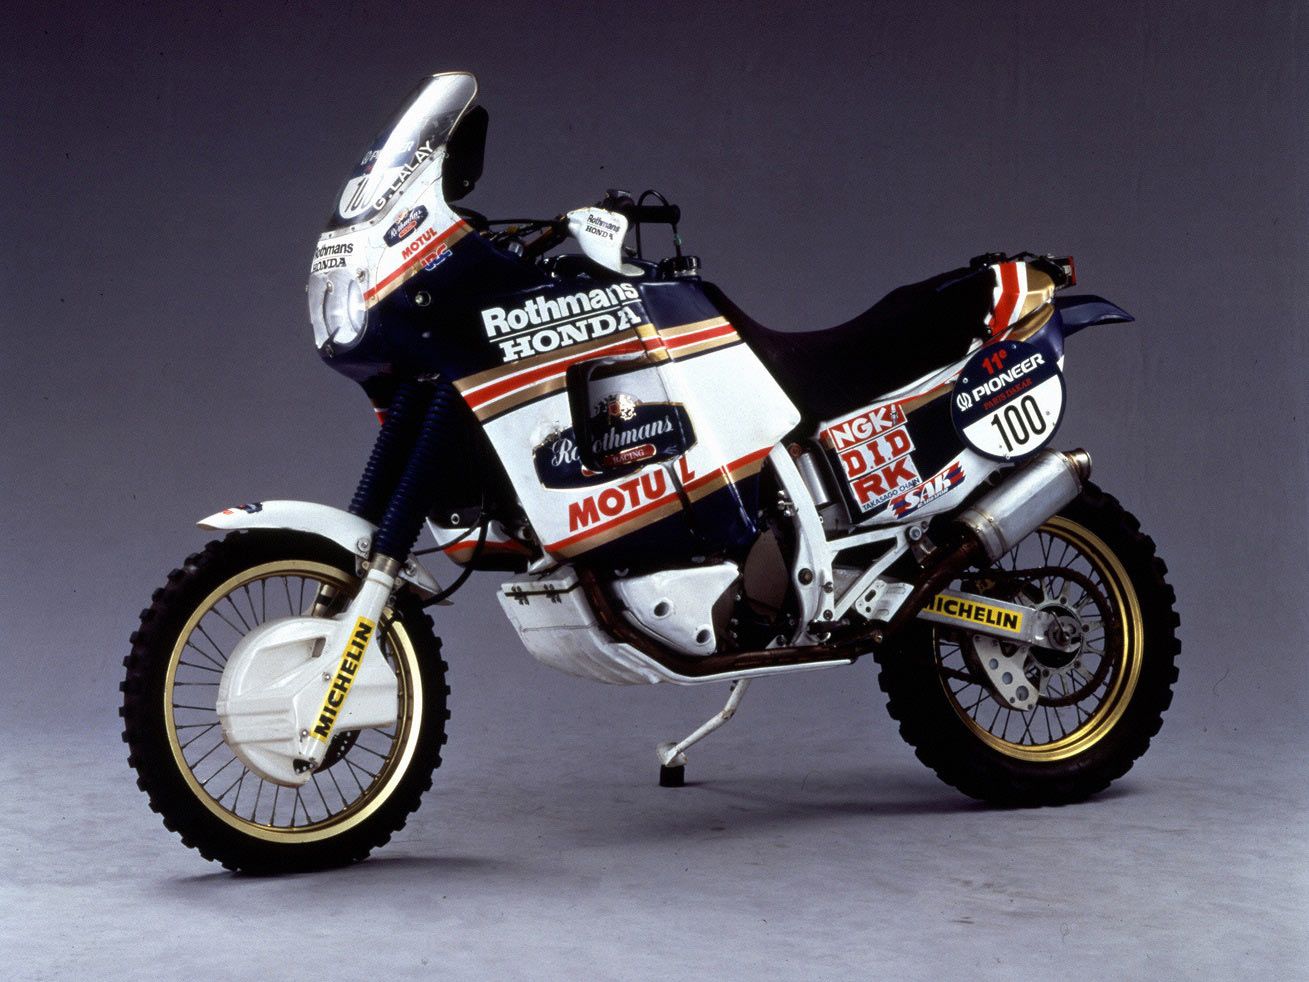 Will the original Africa Twin please stand up! Honda’s NXR750V won the Dakar Rally in 1986 with Cyril Neveu behind the bars.